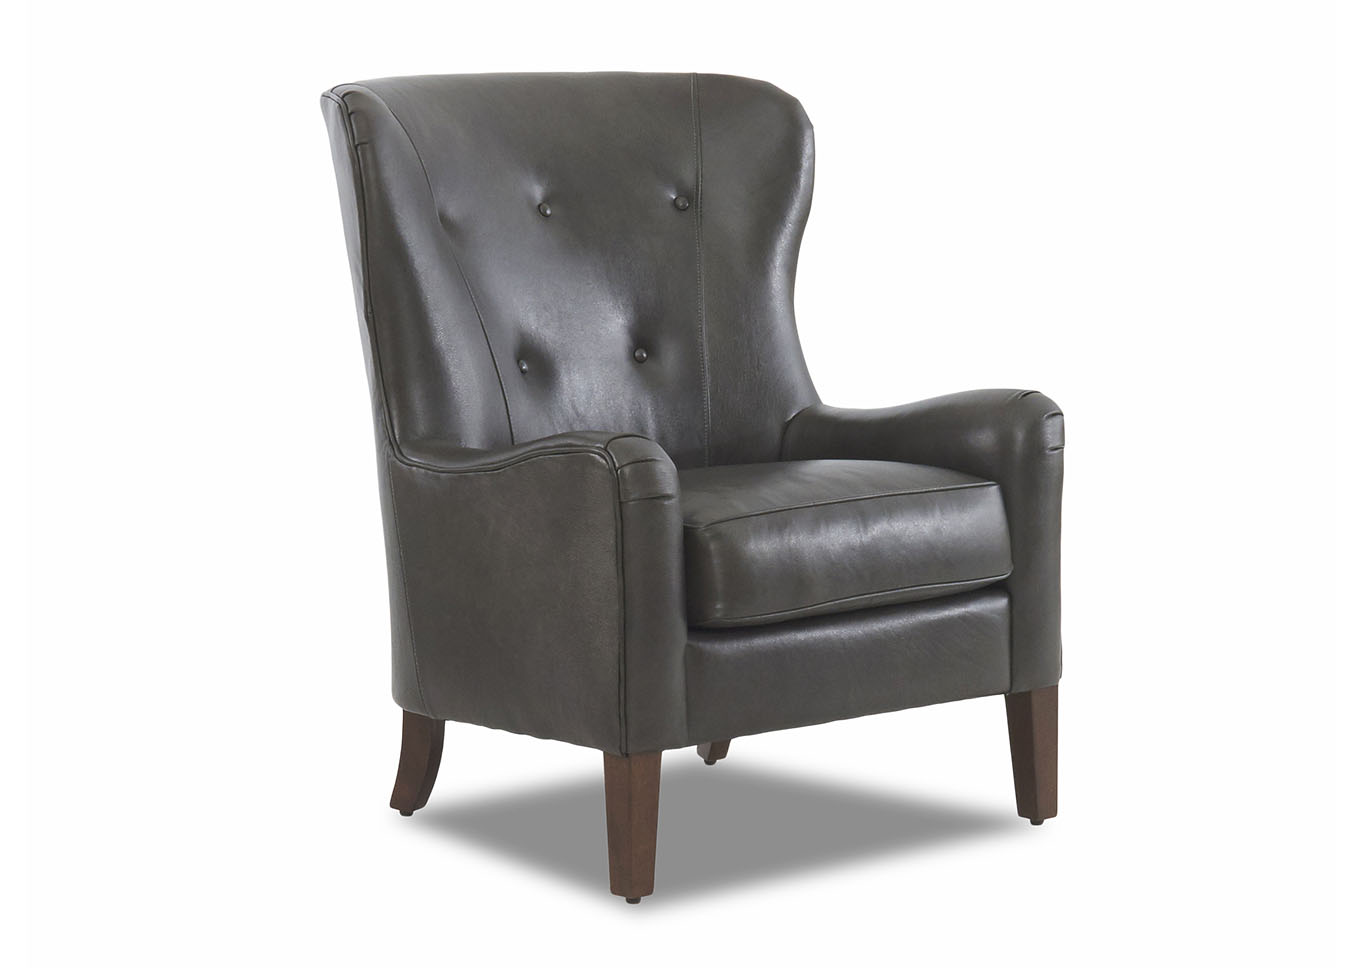 Annabel Stationary Leather Chair,Klaussner Home Furnishings